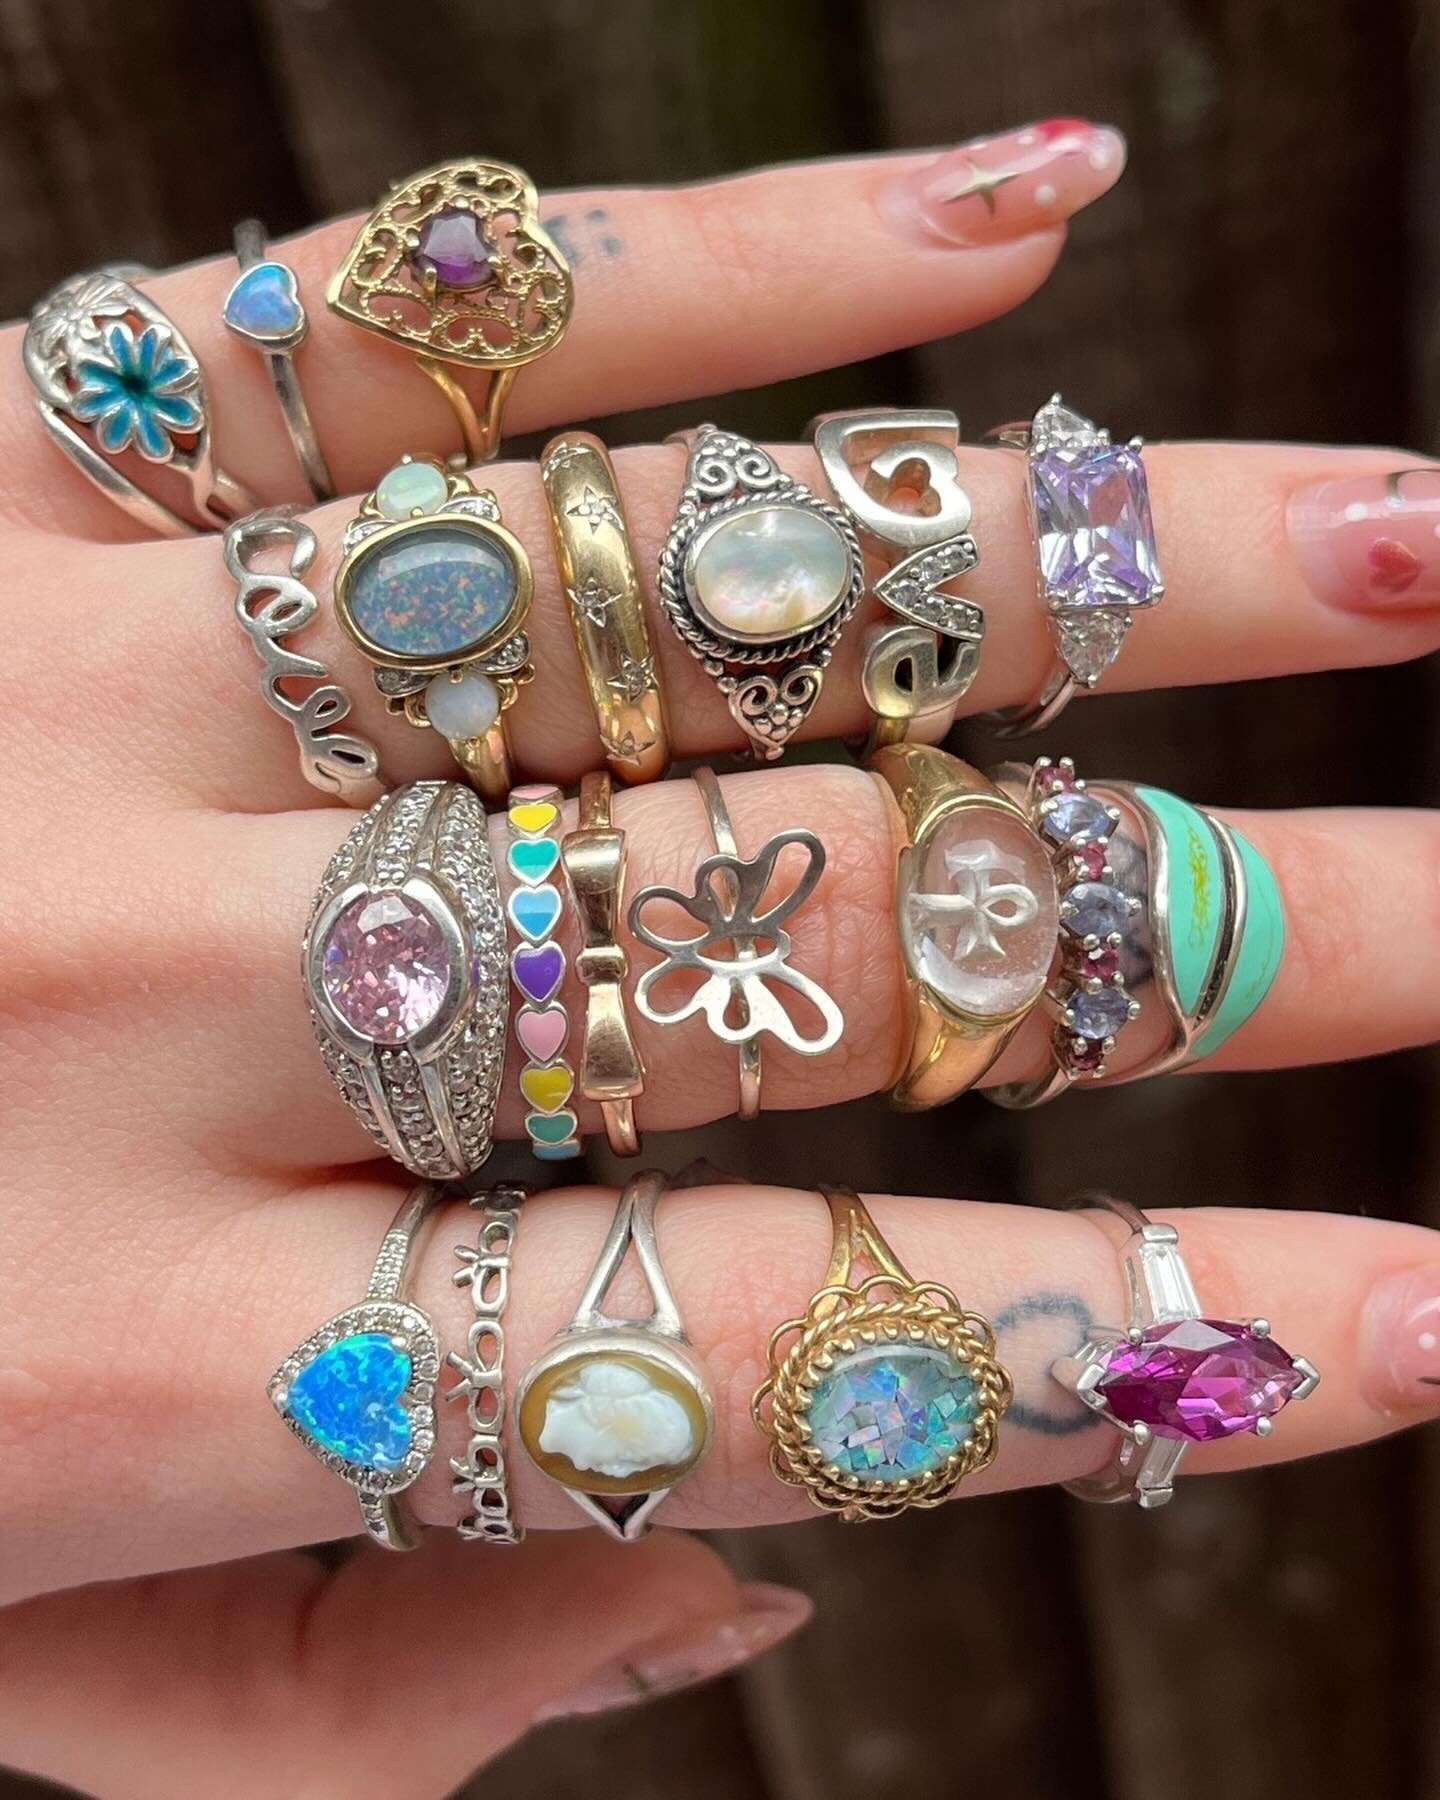 🌸 Spring is in the air, and so are stunning rings! Get ready for the SPRING RING BOX, arriving Sunday 5th May on SORRELLJEWELS.COM 💍
⠀⠀⠀⠀⠀⠀⠀⠀⠀
Indulge in a delightful selection of 49 vintage rings, crafted from a mix of 9ct gold and sterling silver